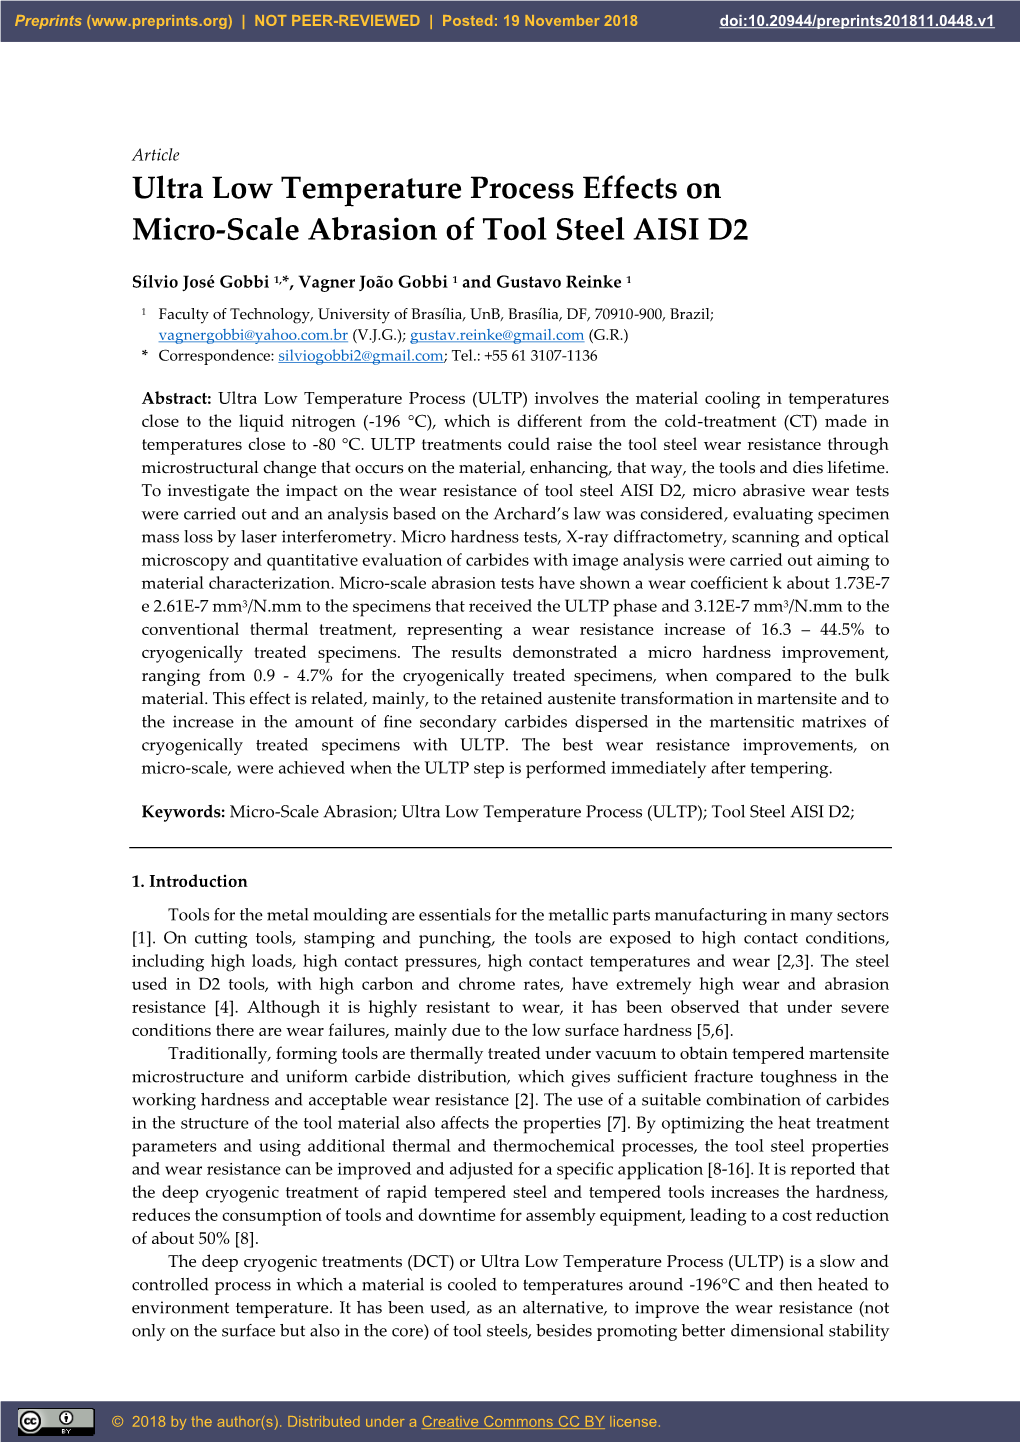 Ultra Low Temperature Process Effects on Micro-Scale Abrasion of Tool Steel AISI D2